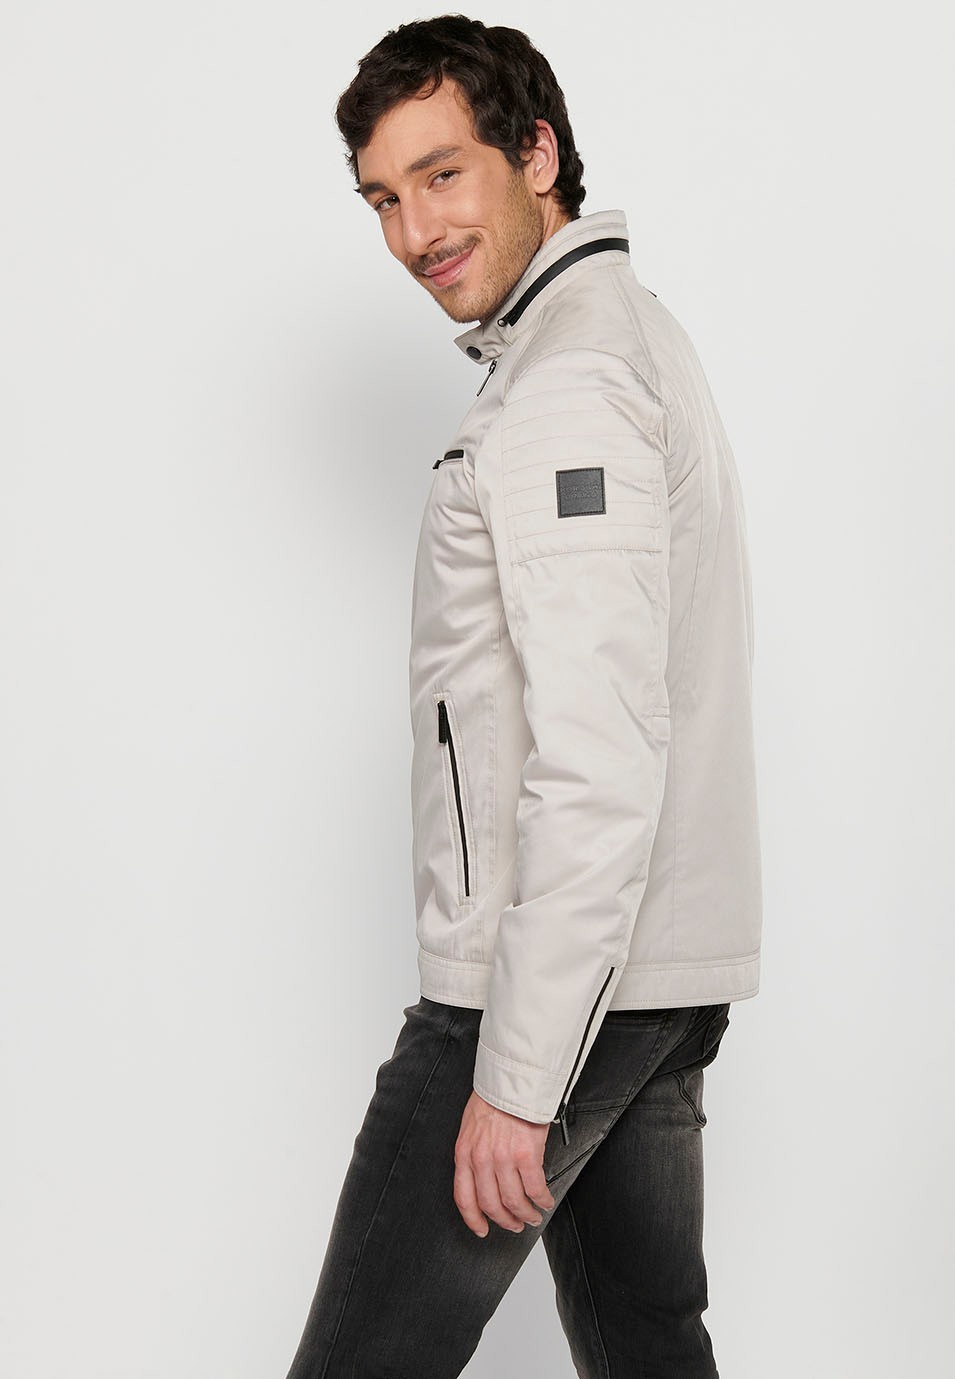 Beige Long-sleeved Jacket with Round Neck and Front Zipper Closure for Men 10